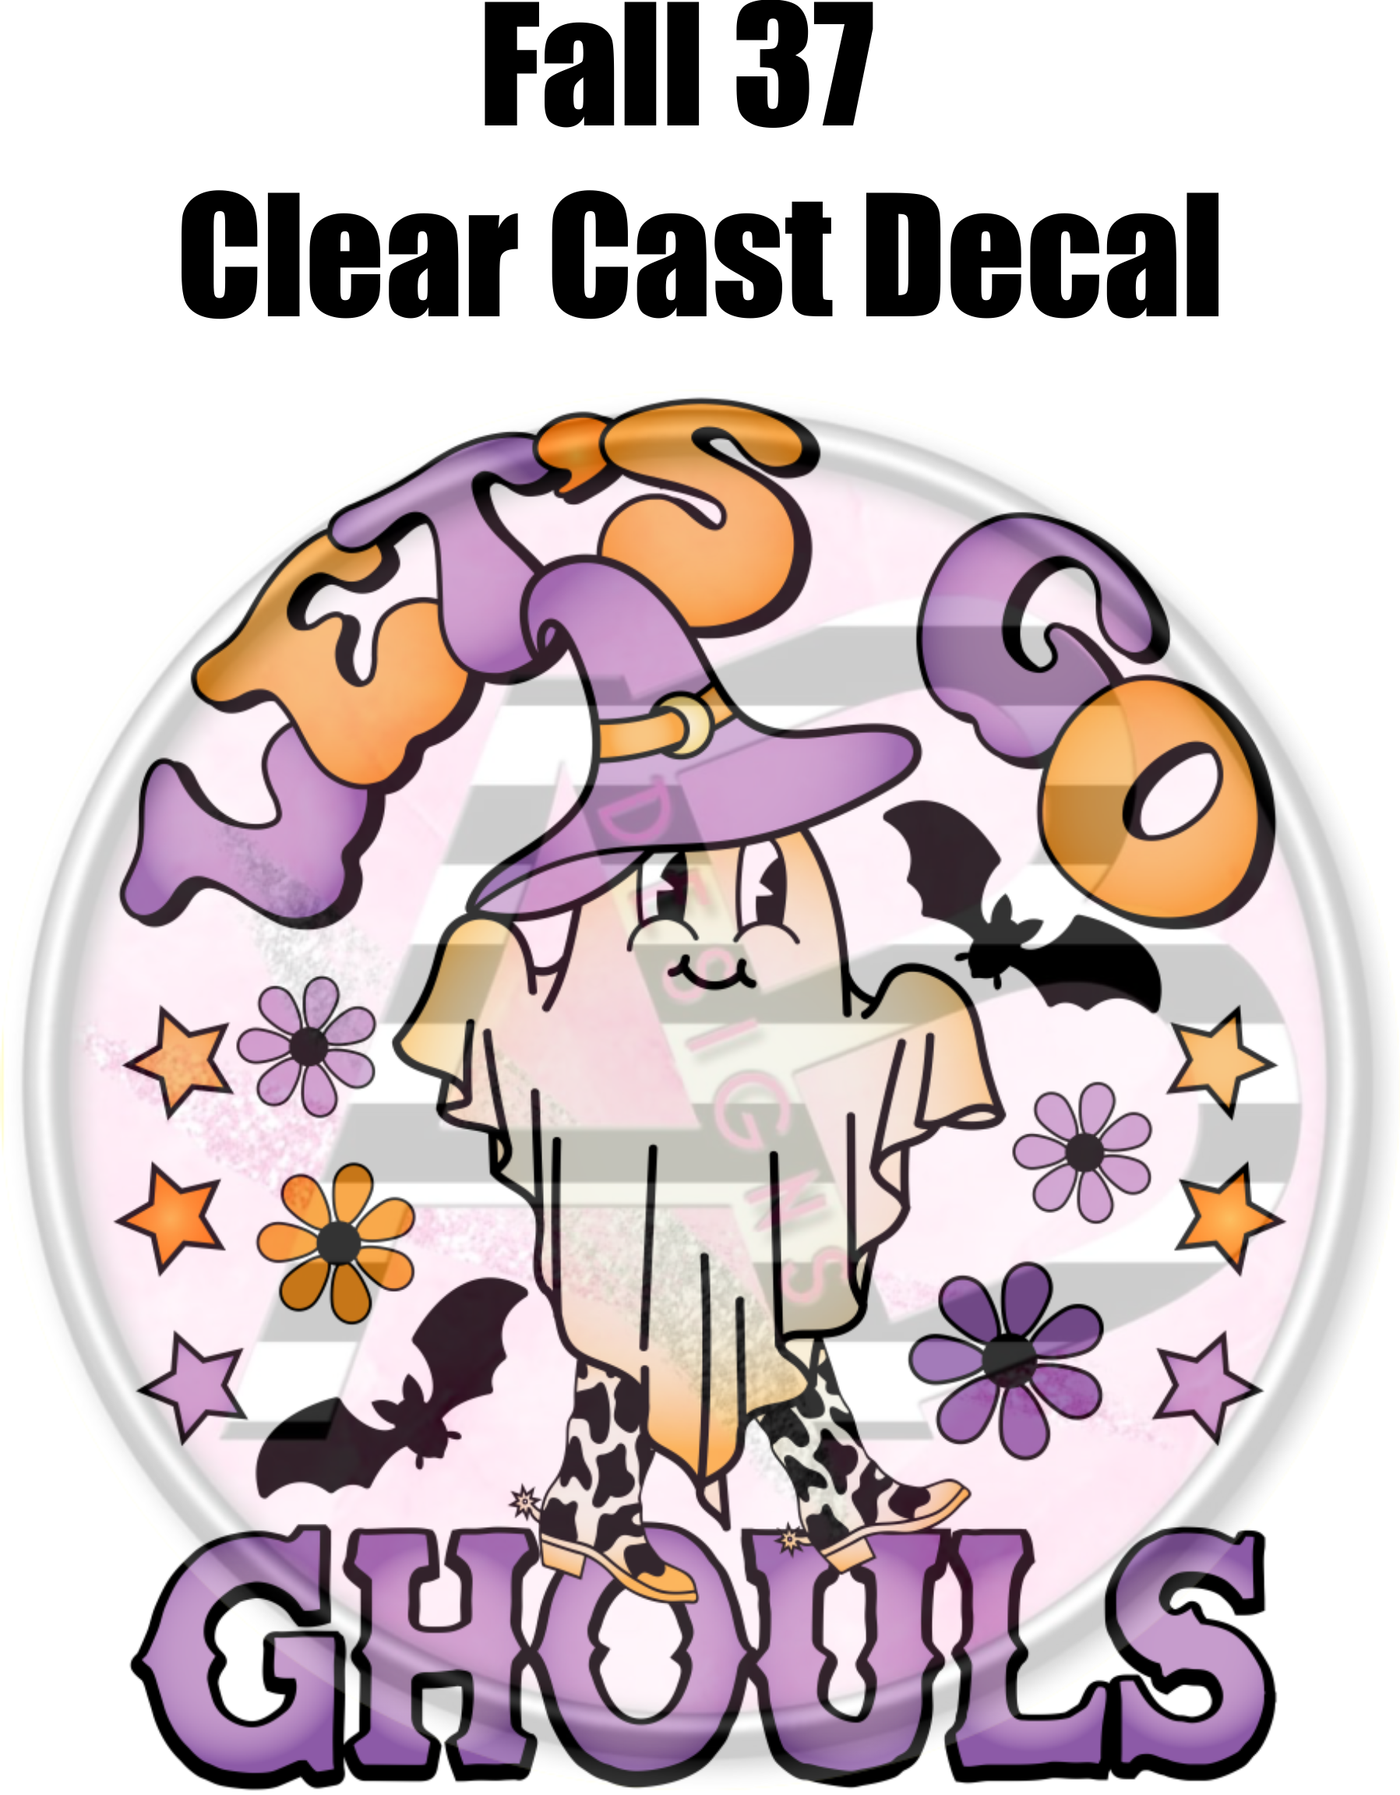 Fall 37 - Clear Cast Decal